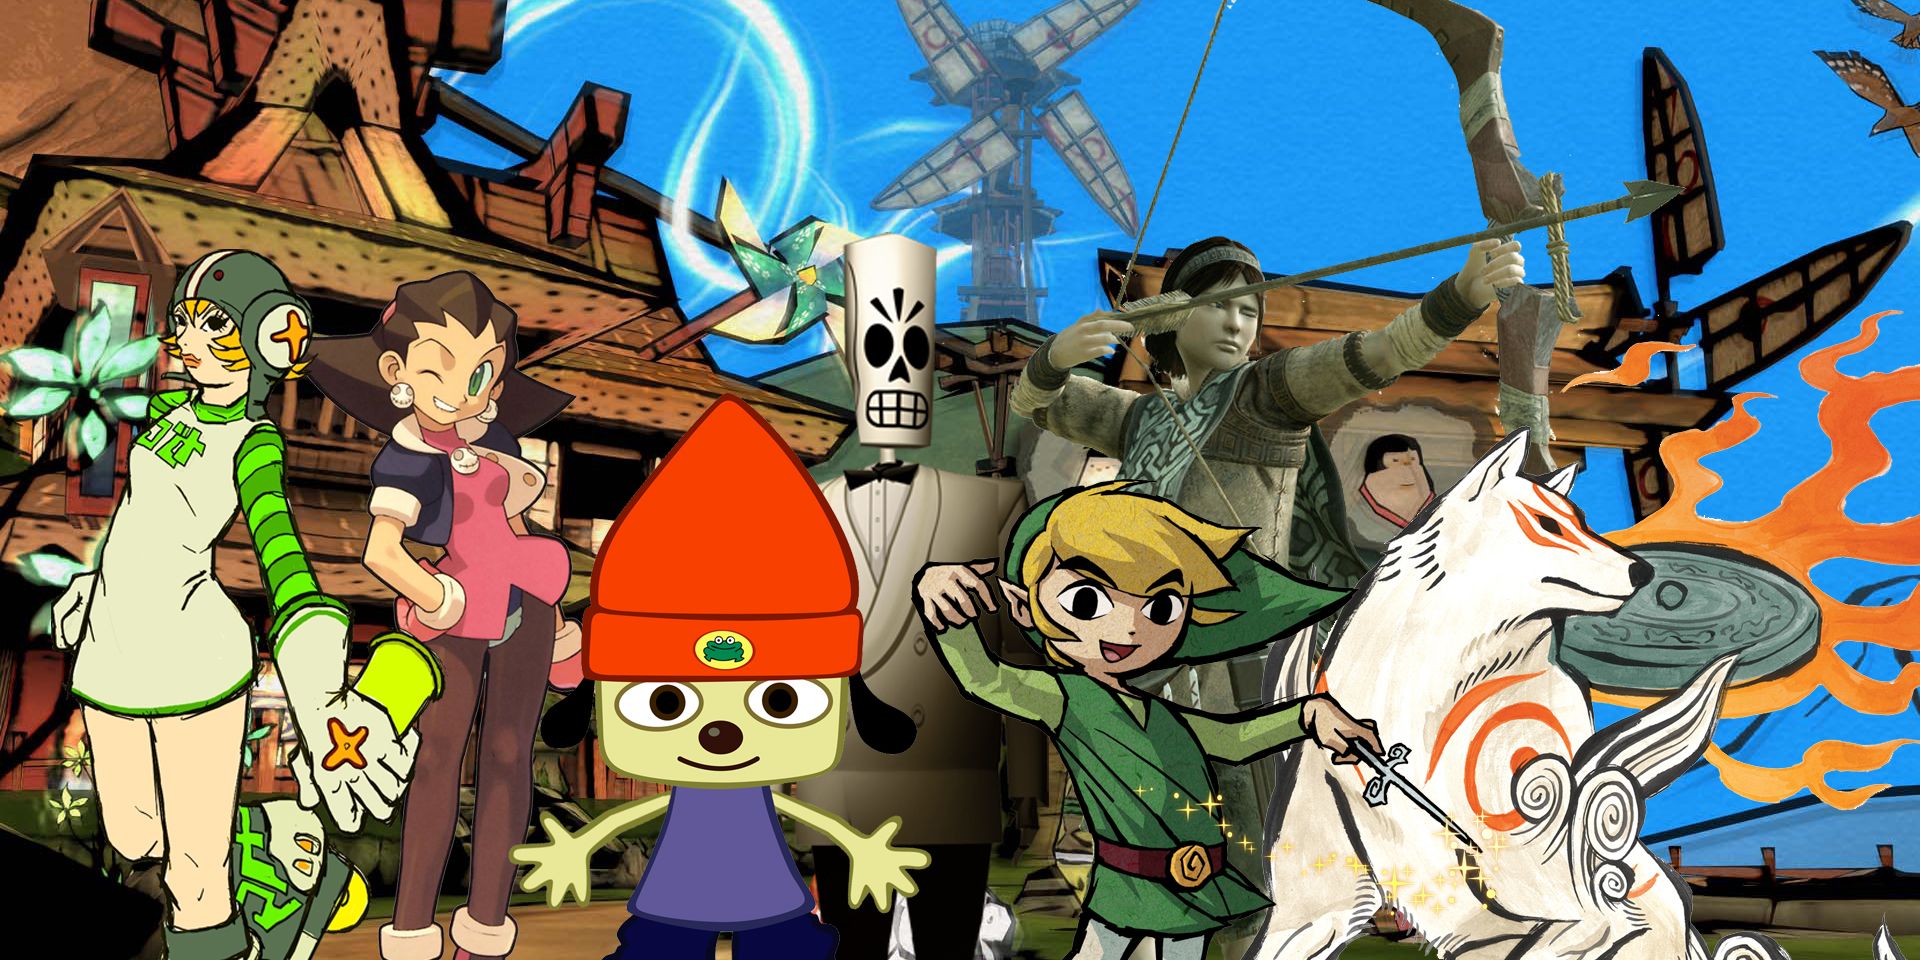 A collage of characters from 3D Video Games, including Link, Mega Man, and Grim Fandango